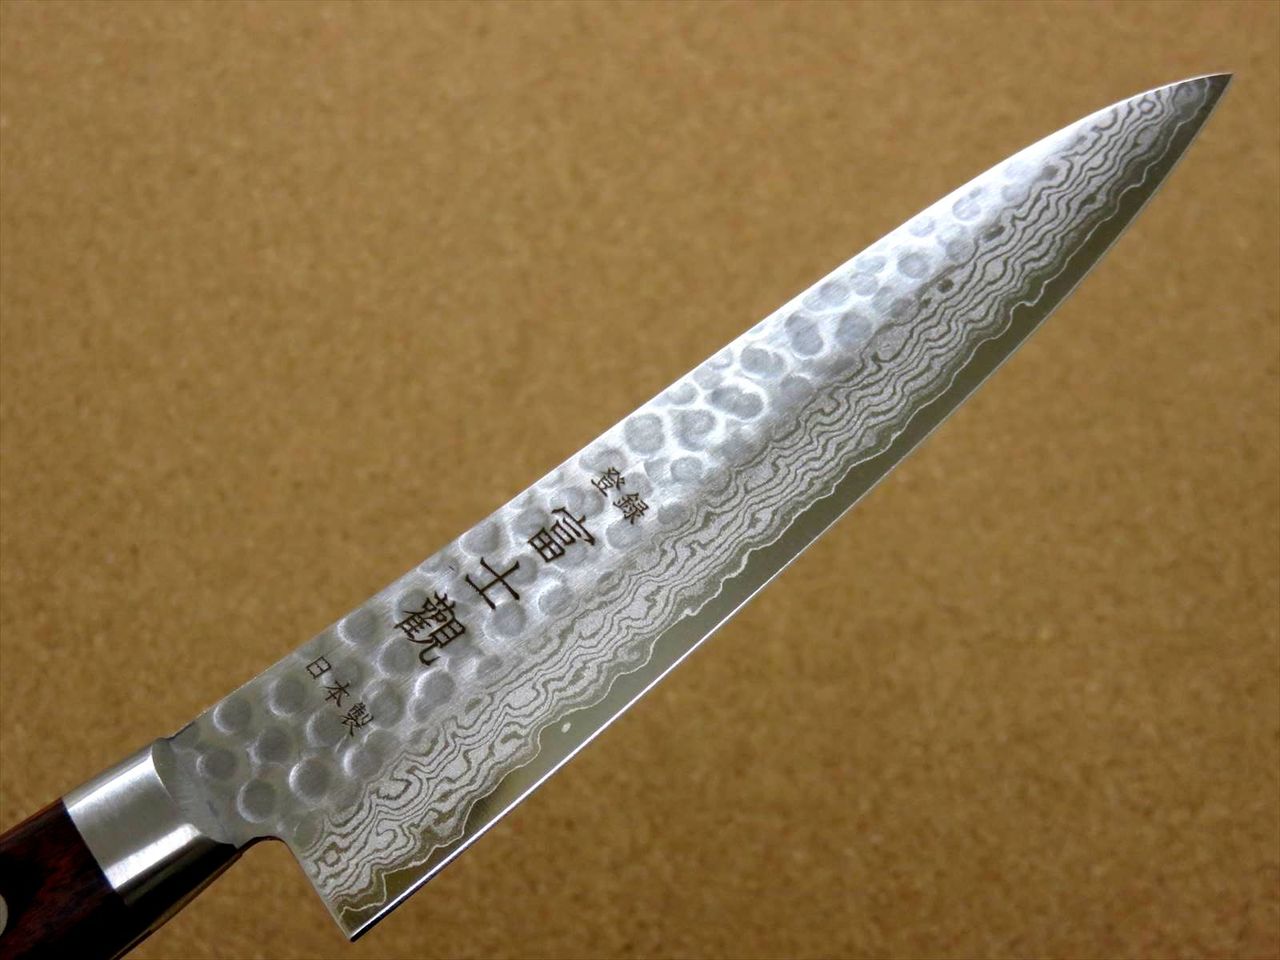 Japanese FUJIMI Kitchen Utility Knife 5.5" Hammer Forged VG-10 Damascus From JAPAN